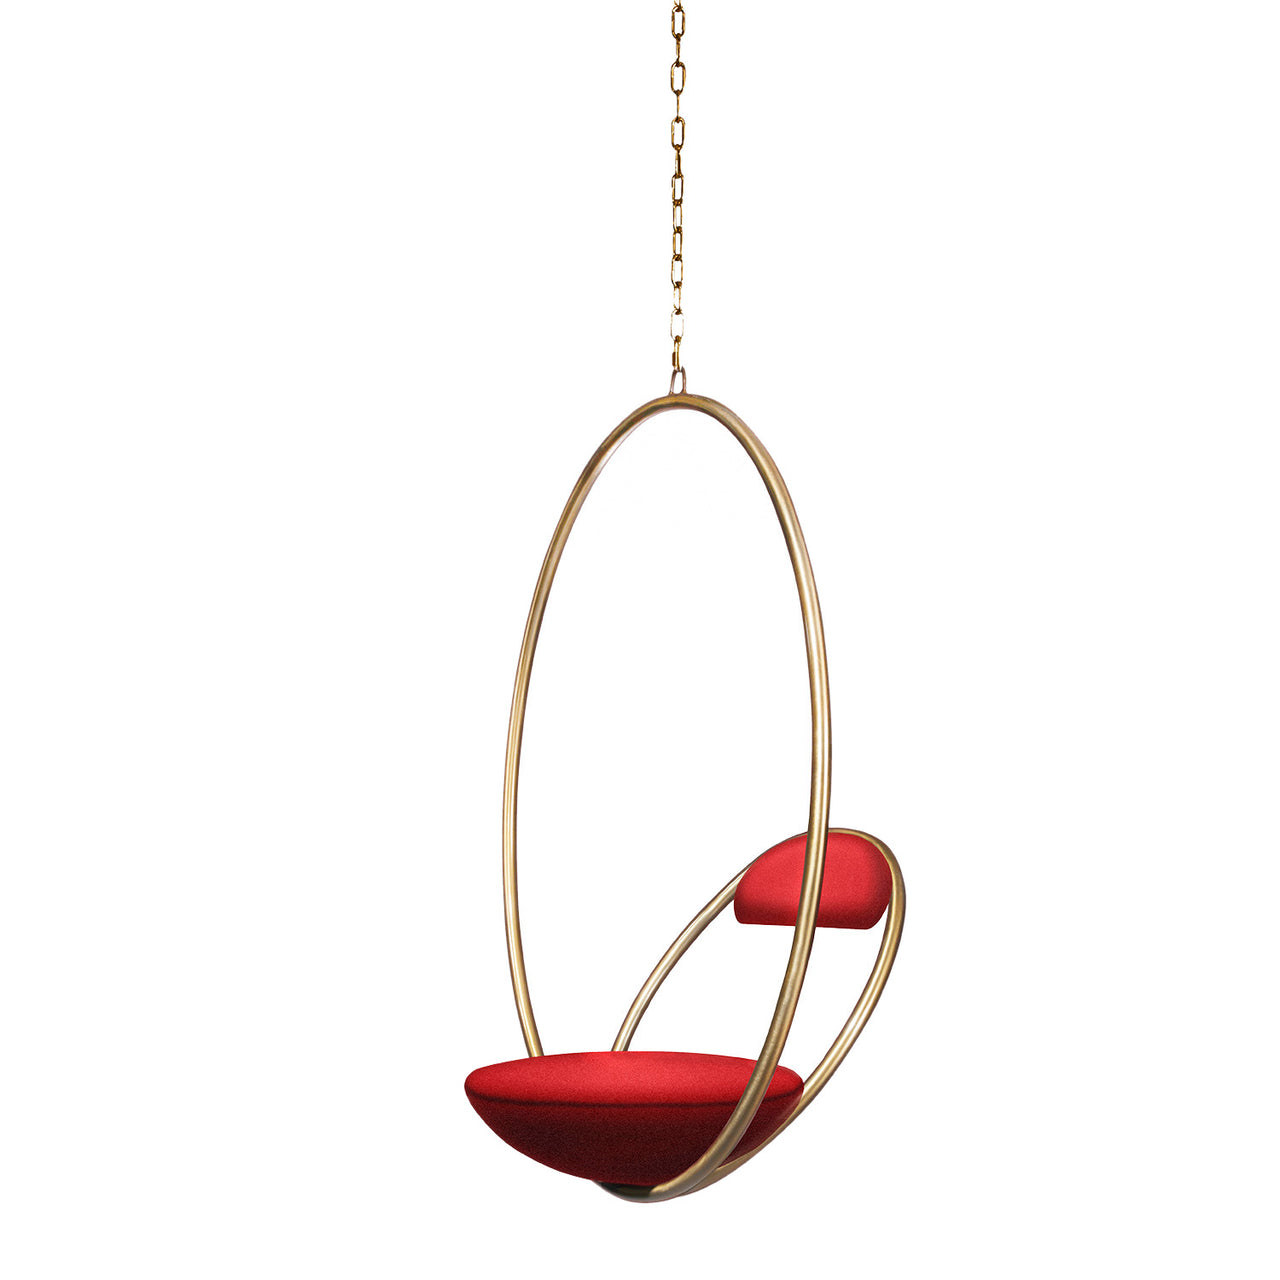 Hanging Hoop Chair: Brushed Brass